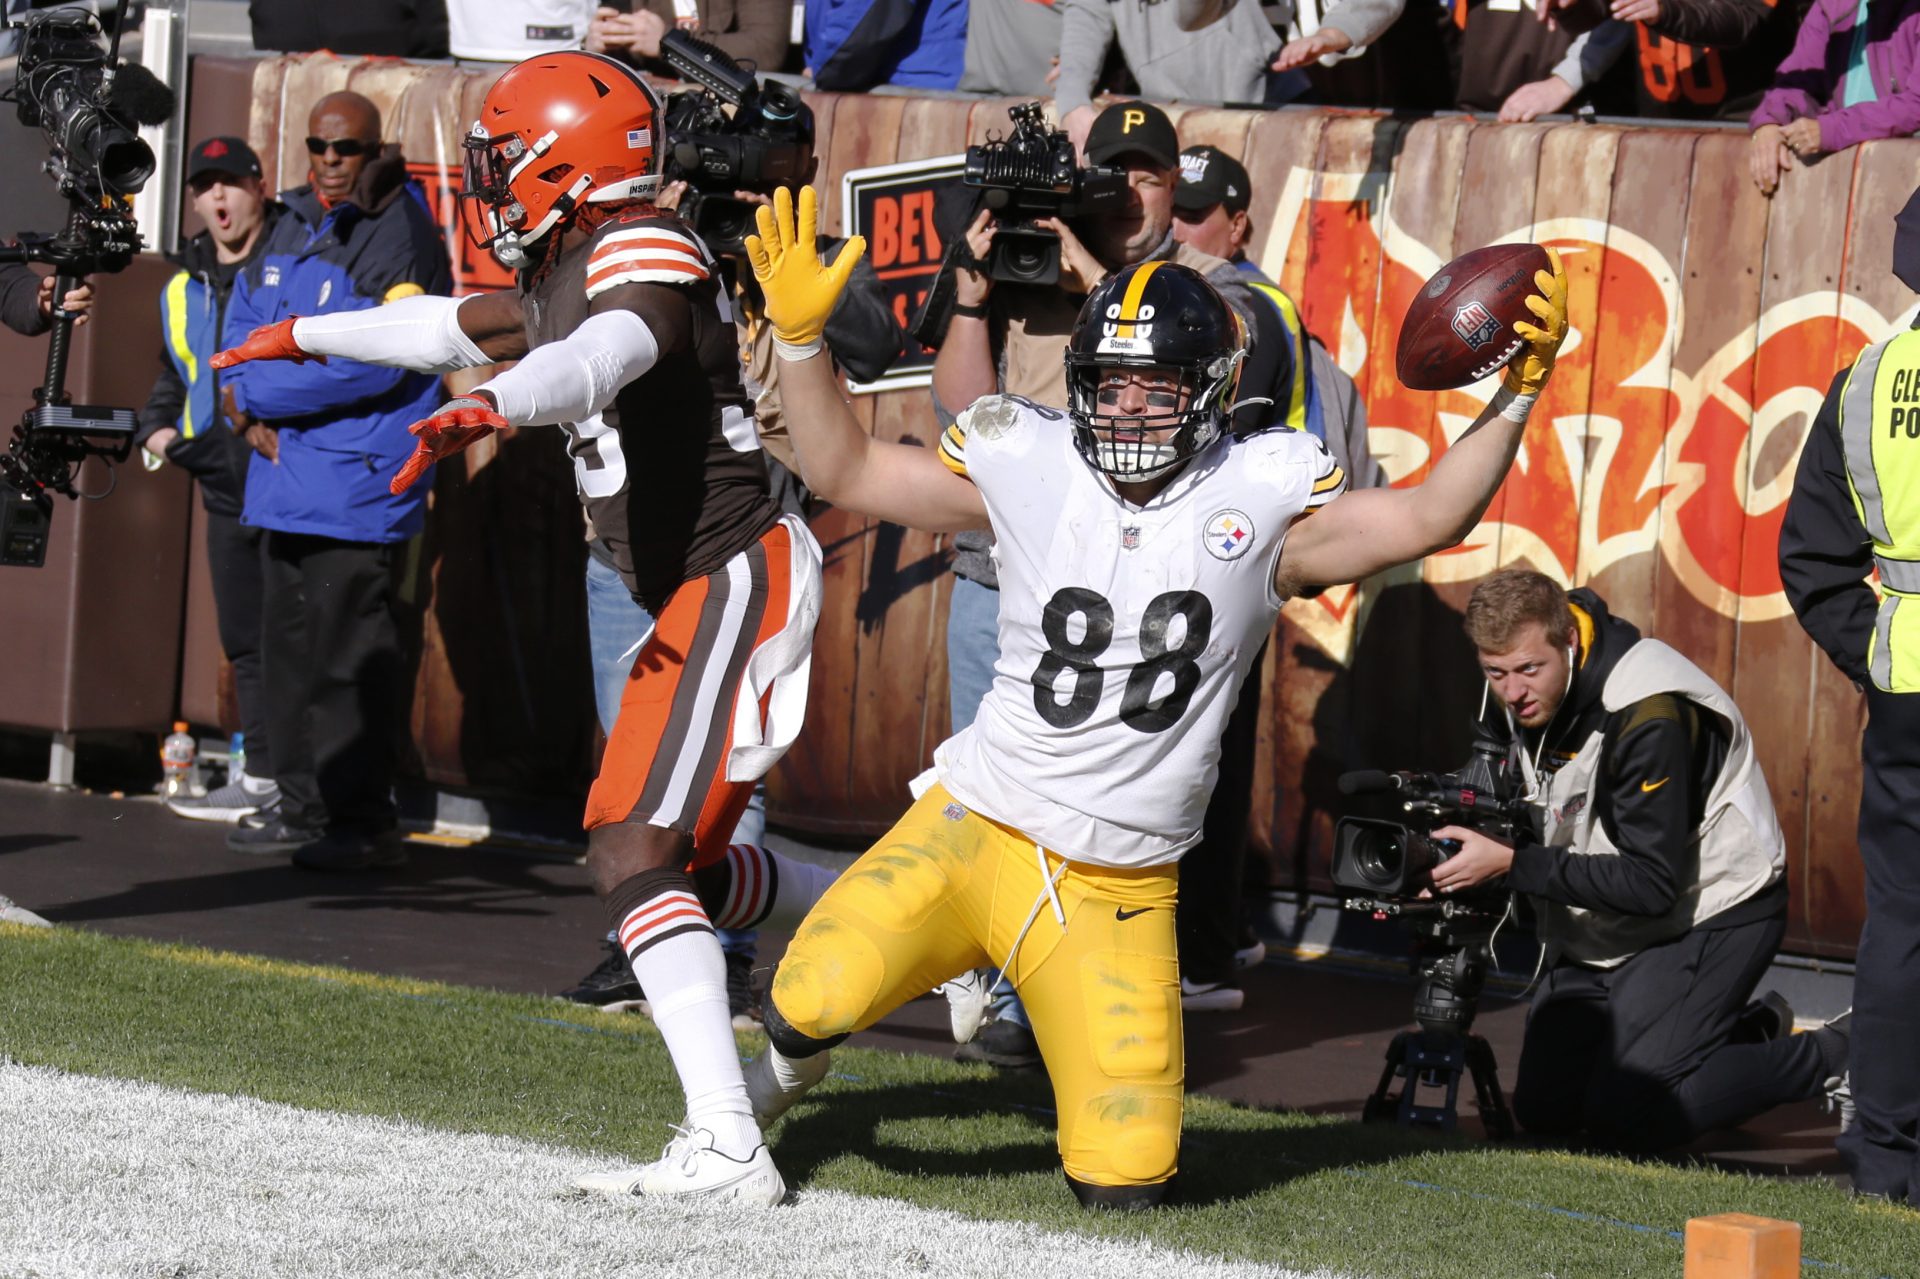 Pittsburgh Steelers tight end Pat Freiermuth, right, celebrates after a 2-yard touchdown pass against Cleveland Browns defensive back Ronnie Harrison, left, during the second half of an NFL football game Sunday, Oct. 31, 2021, in Cleveland.